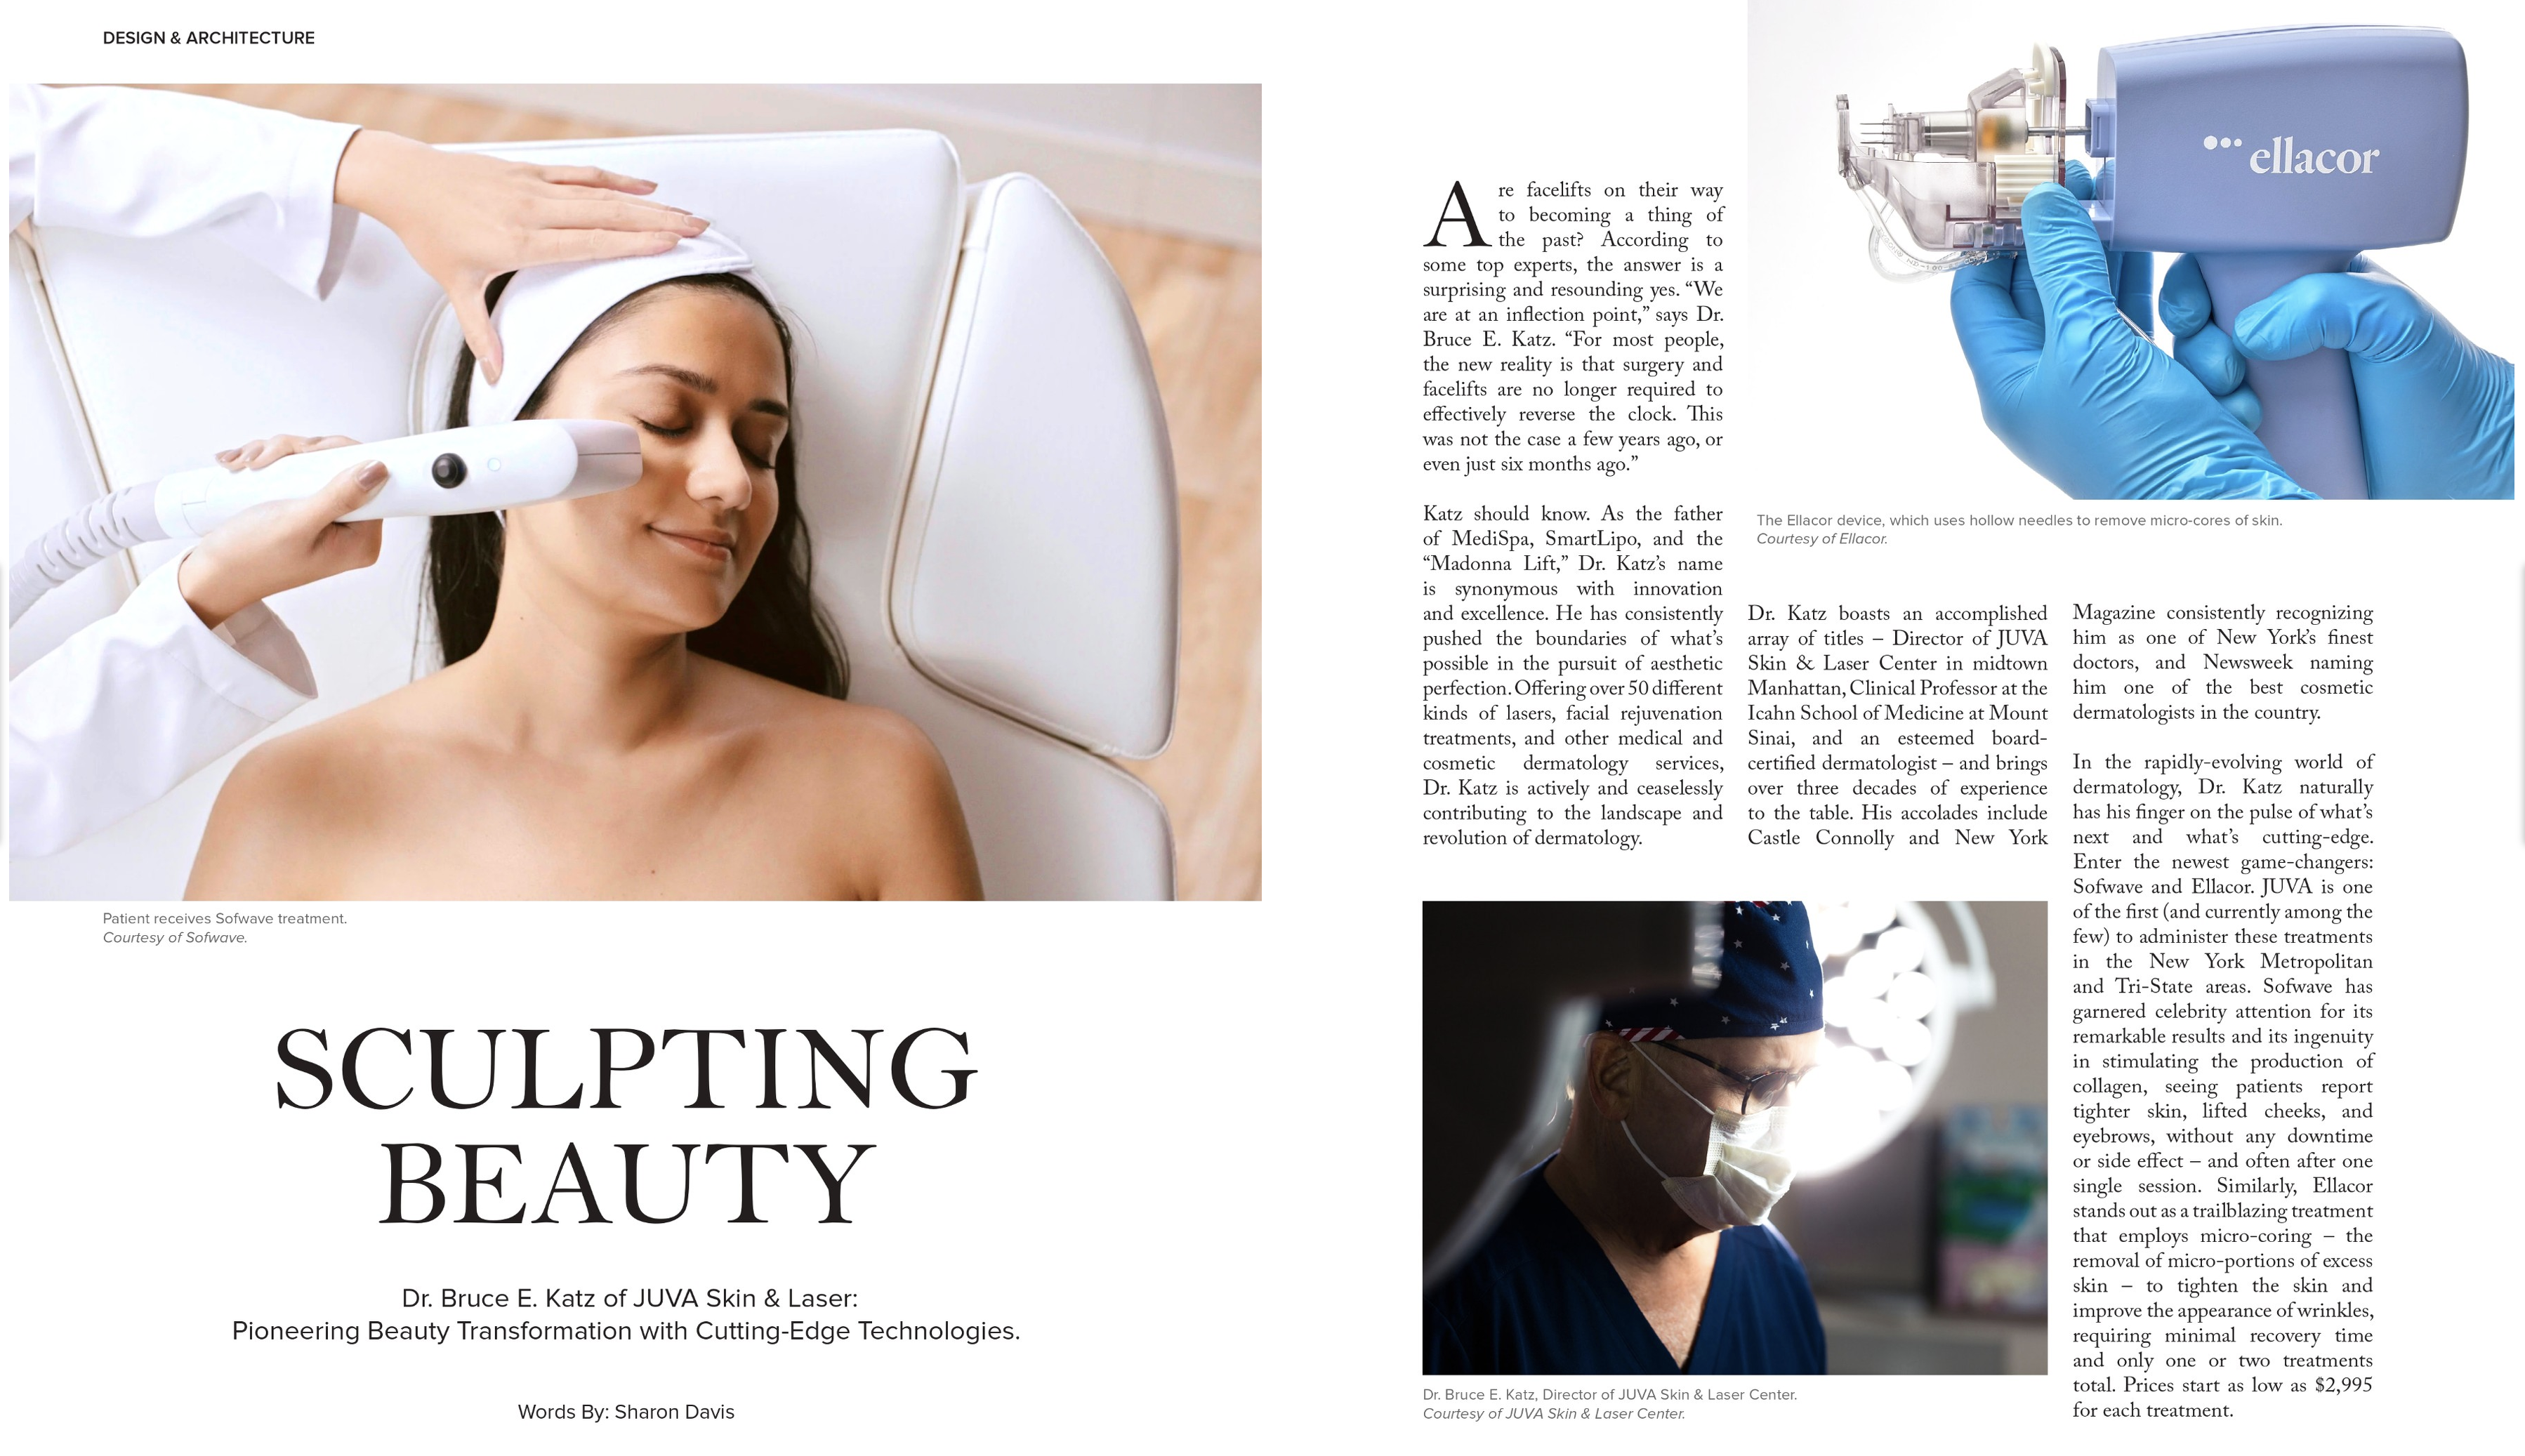 JUVA Skin & Laser Center Blog | Dr. Bruce Katz was featured in Private Air Luxury Homes Magazine about Sculpting Beauty.